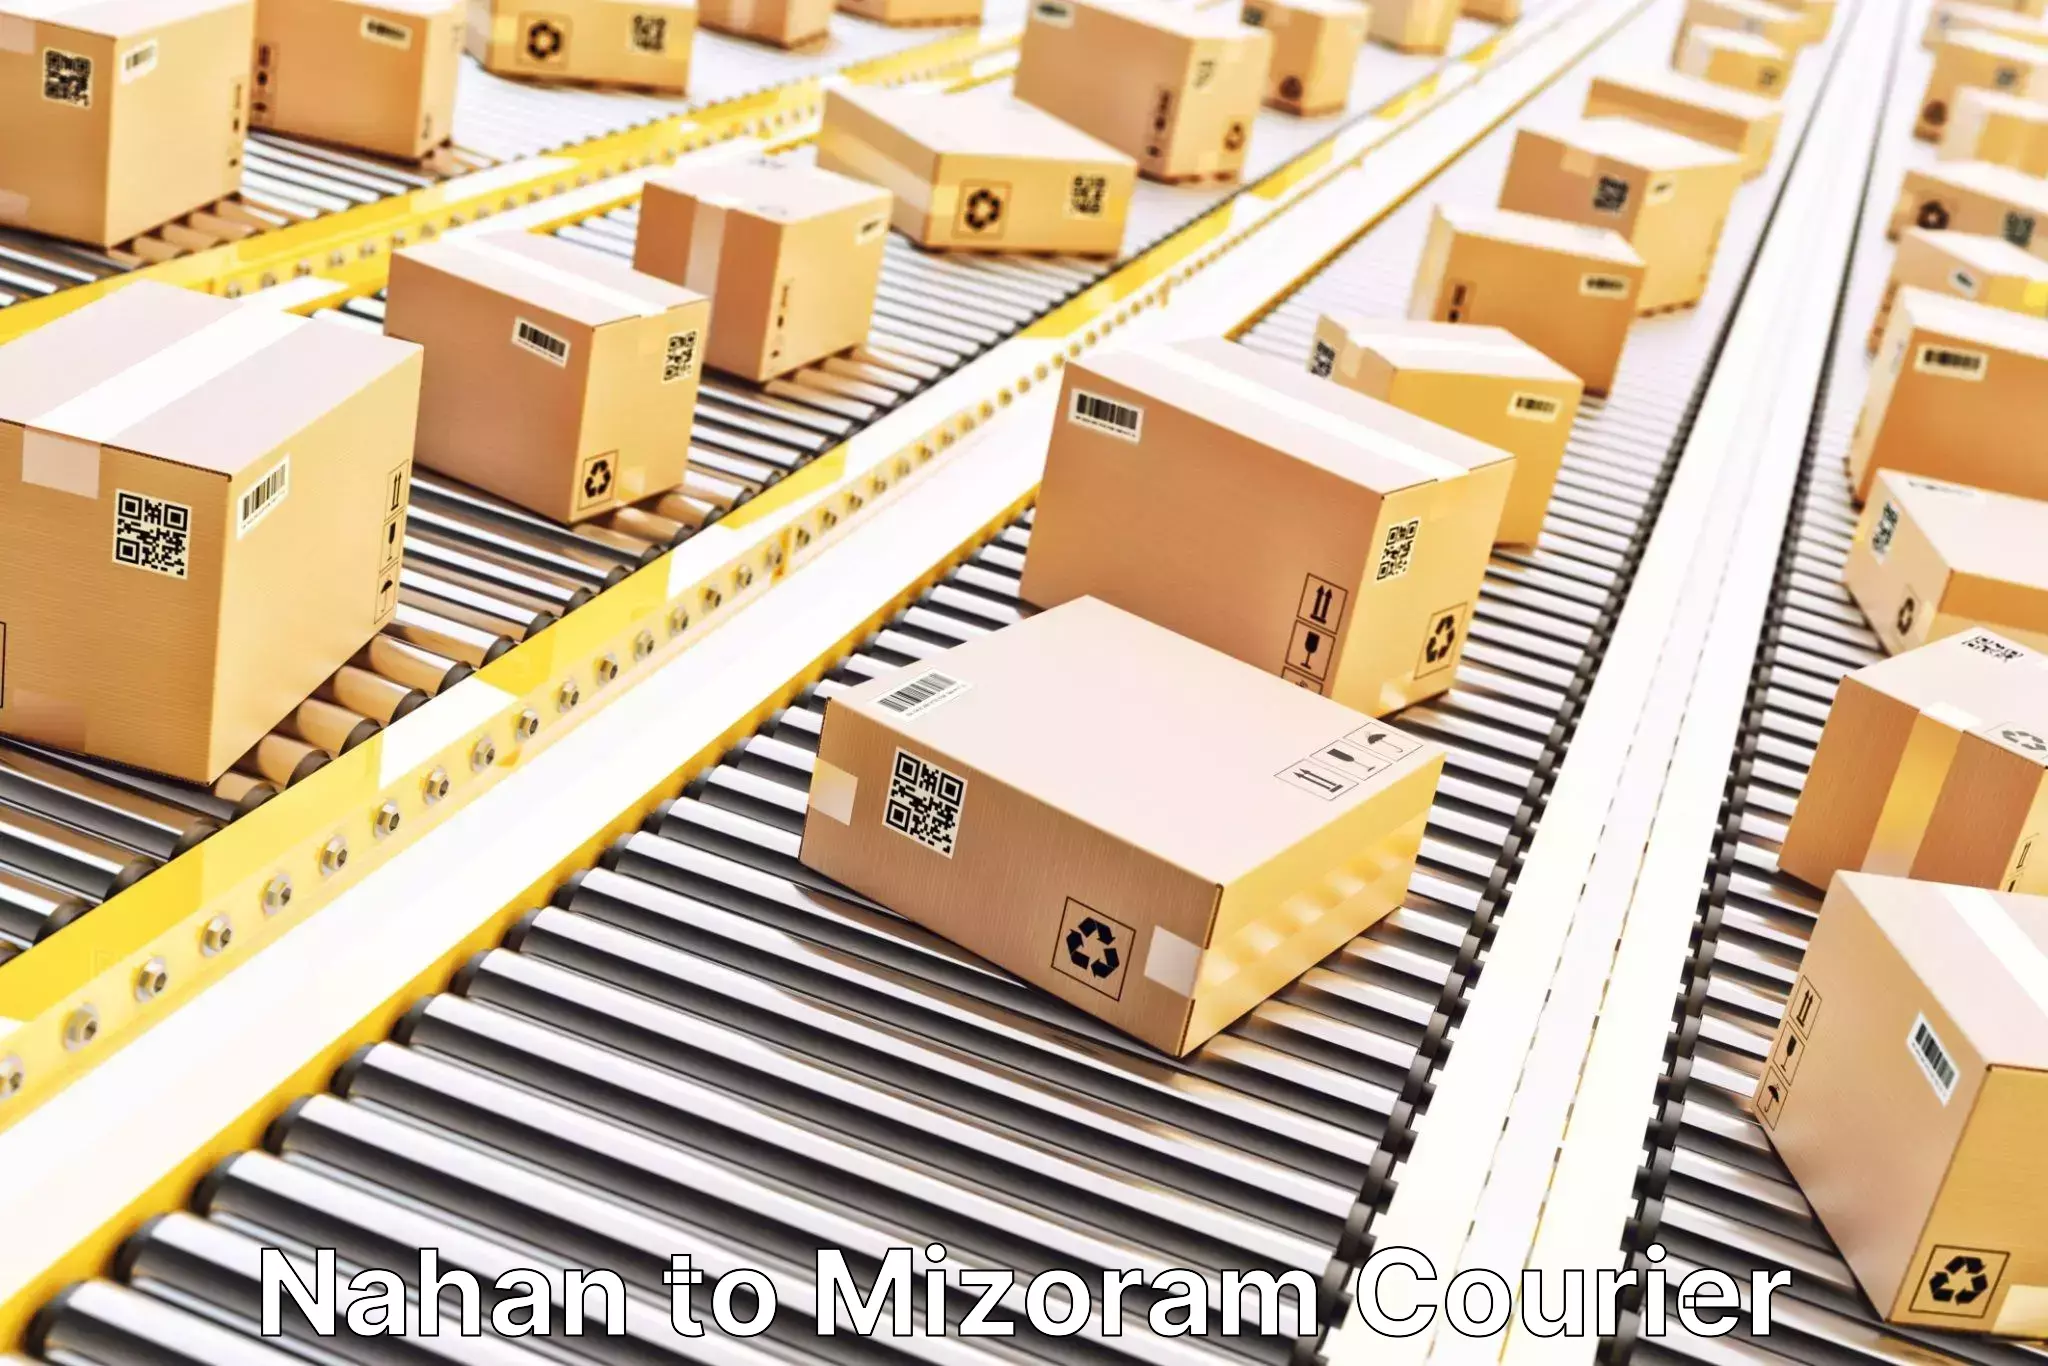 Seamless shipping experience in Nahan to Aizawl